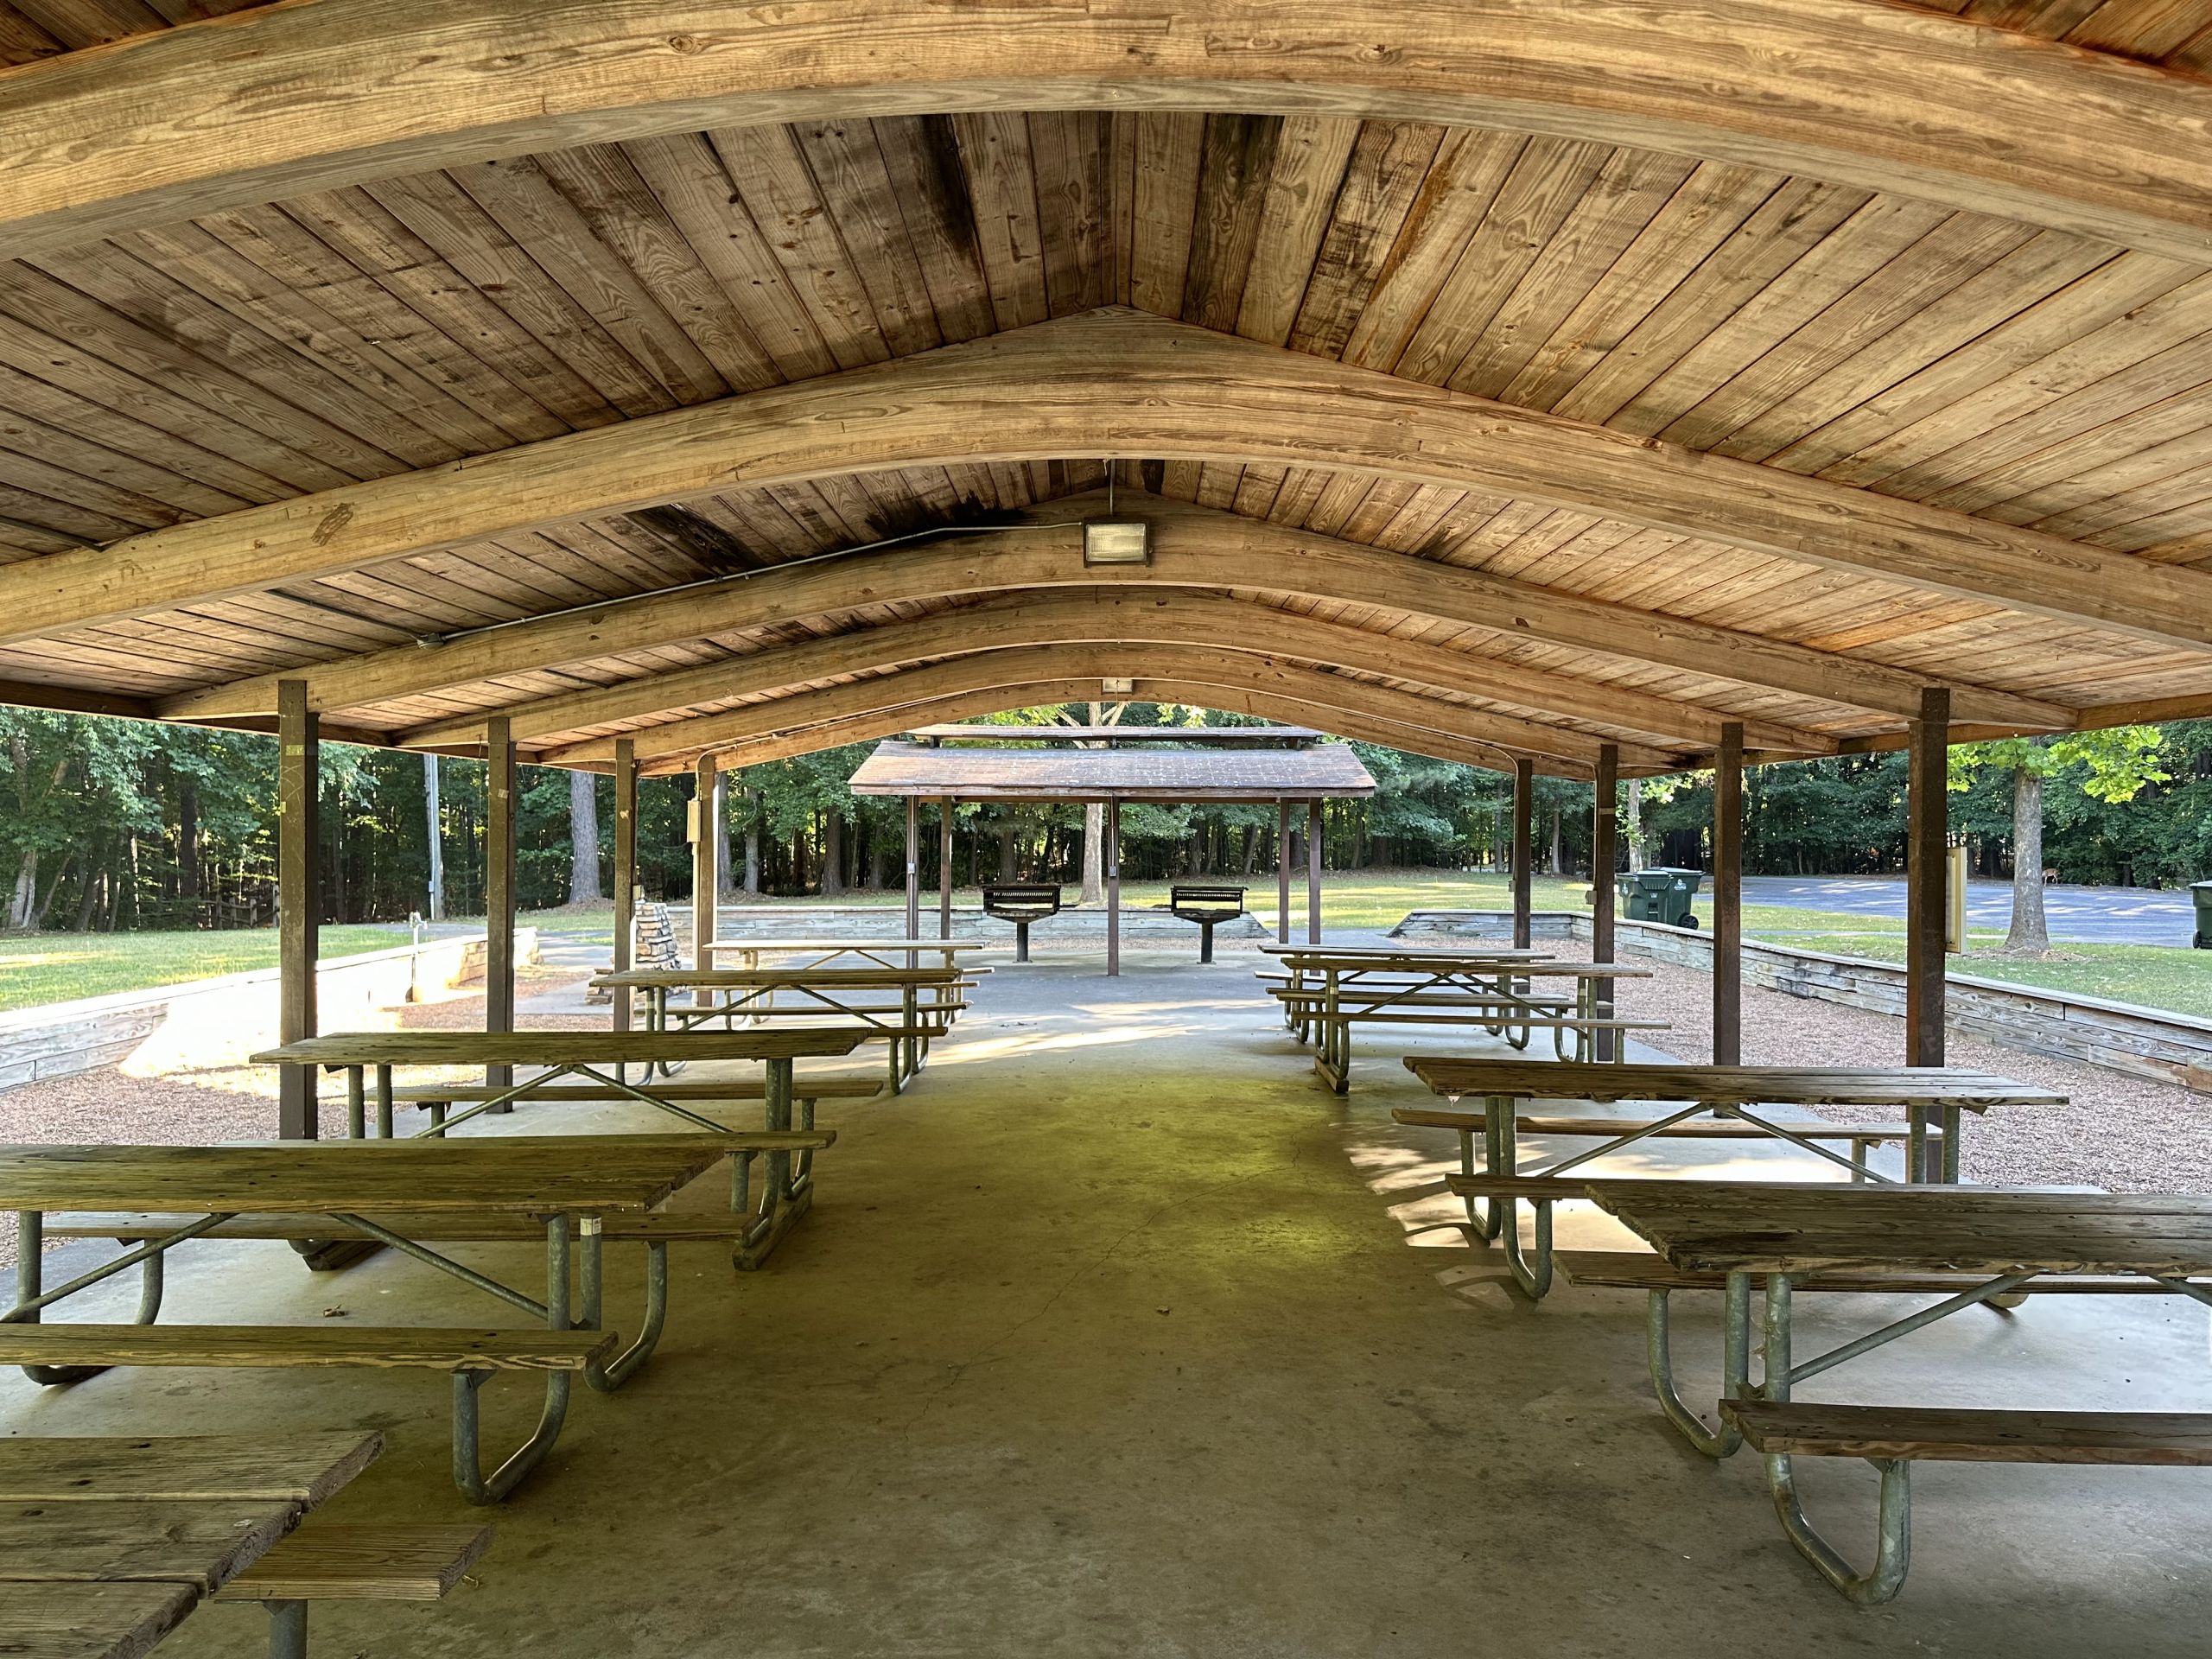 image A spacious, open-air pavilion with wooden roof and multiple picnic tables is situated in a park setting, with green trees in the background.